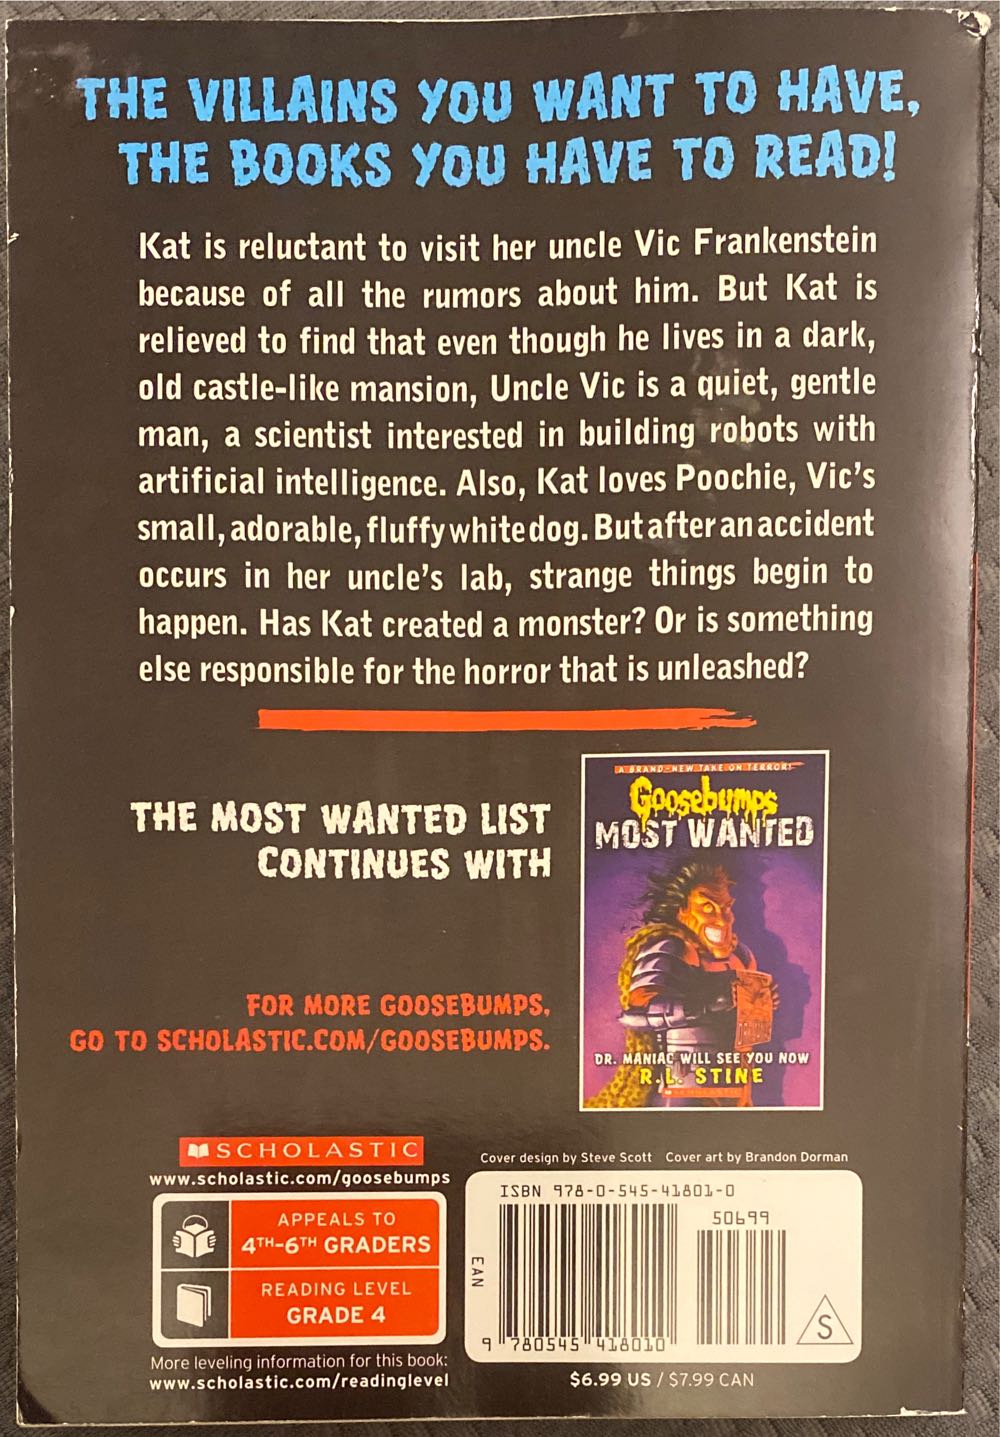 Goosebumps MW #4: Frankenstein’s Dog - R. L. Stine (Scholastic Inc. - Paperback) book collectible [Barcode 9780545418010] - Main Image 2